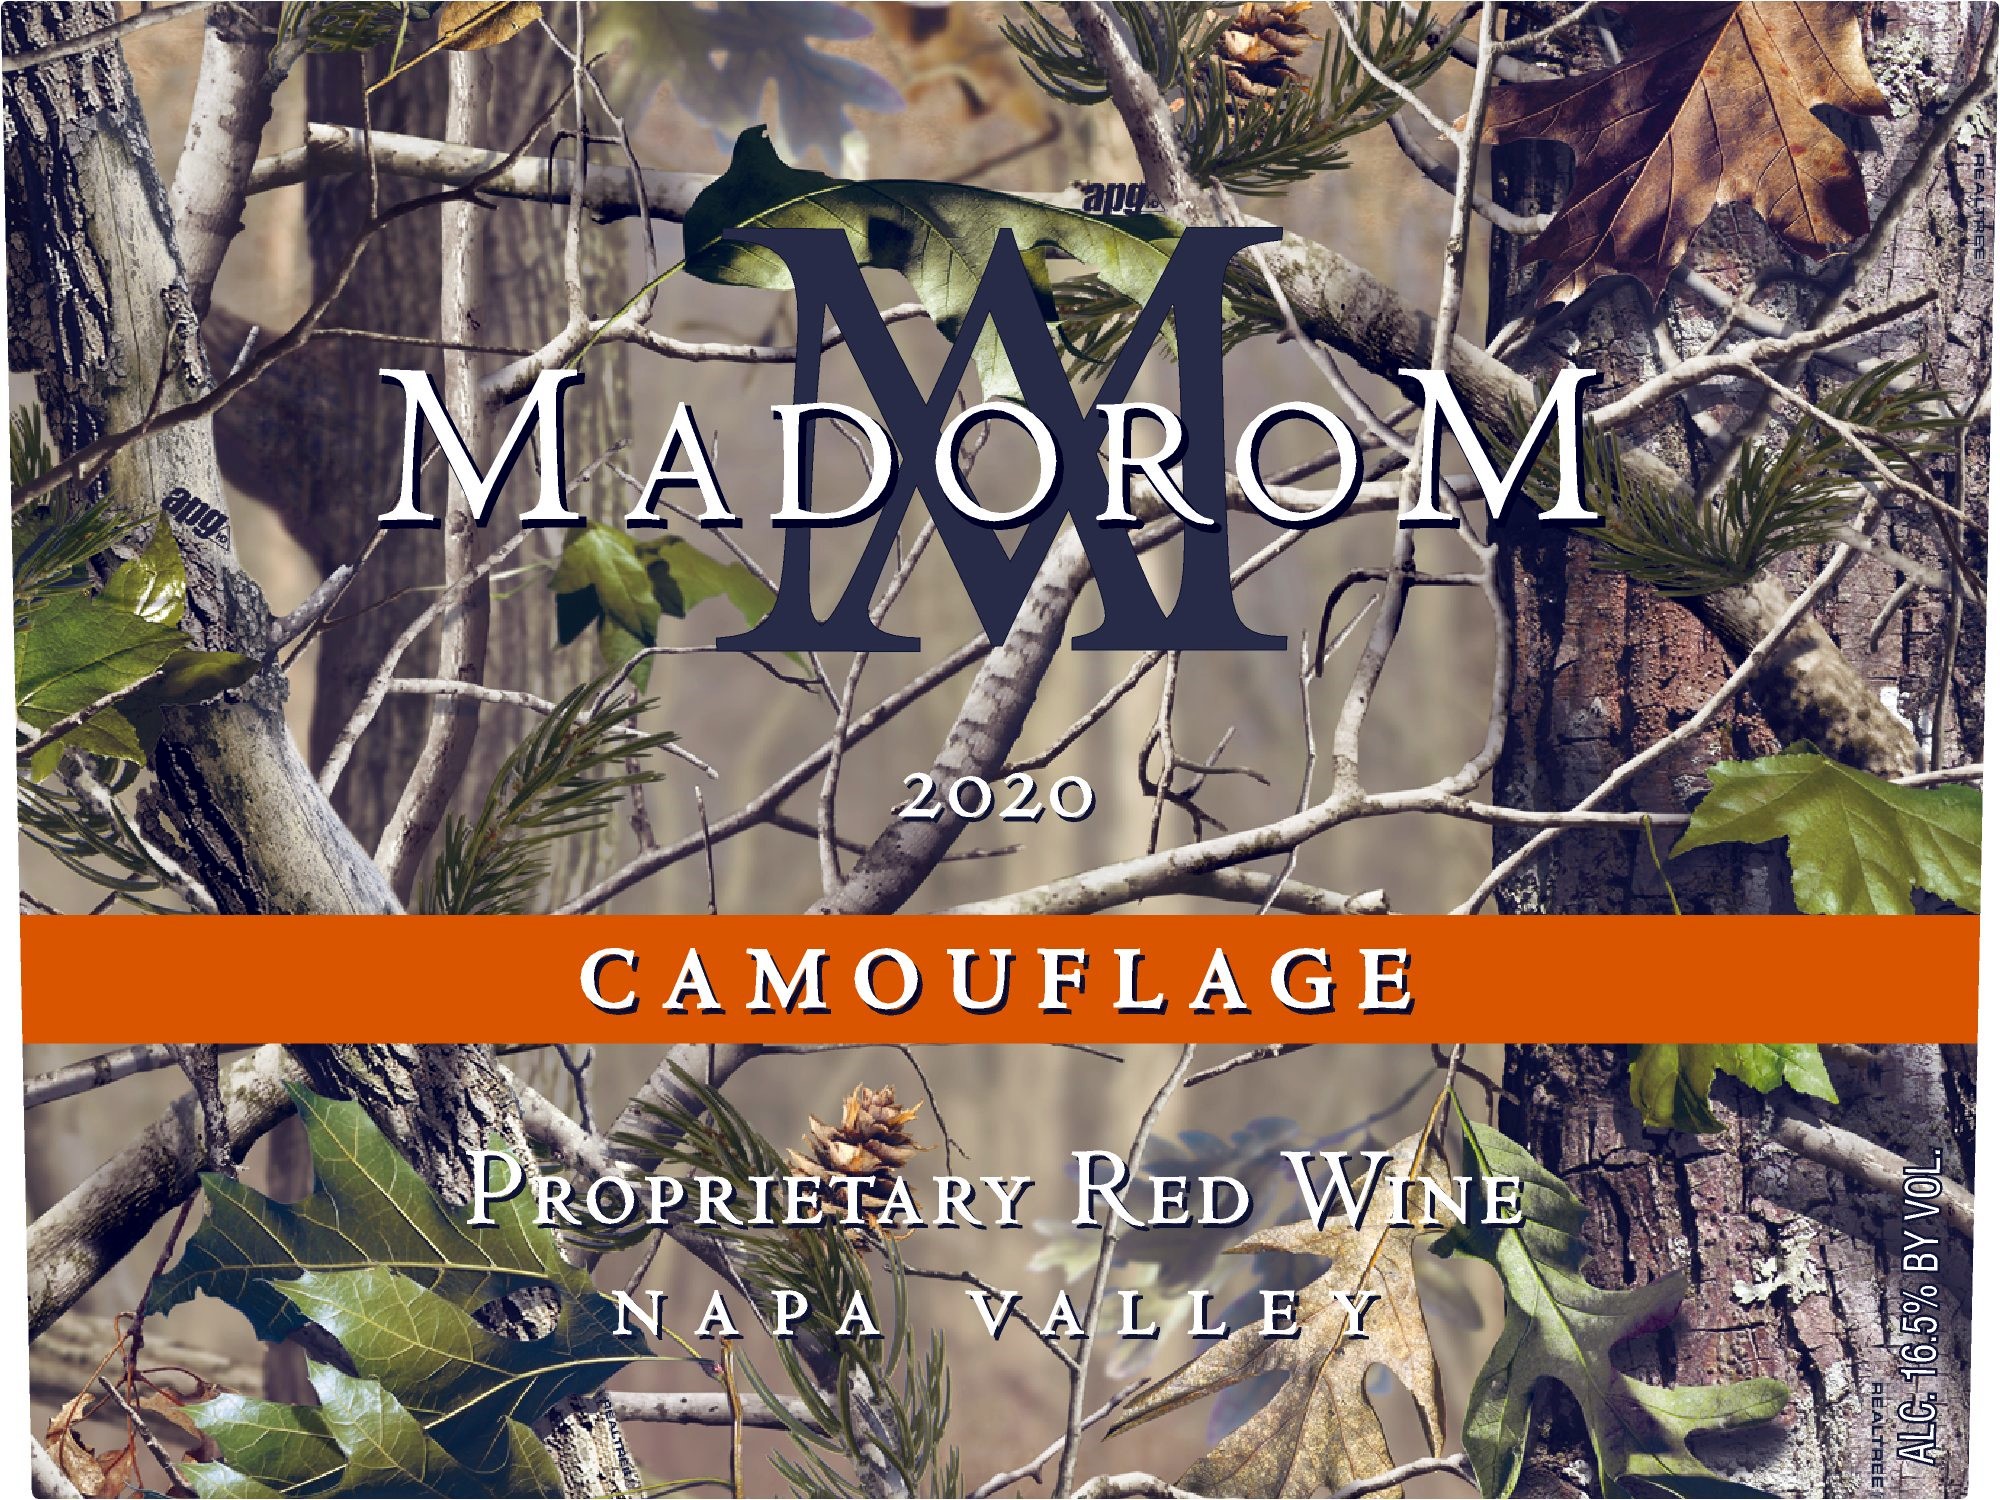 Product Image for 2020 MadoroM Napa Valley Camouflage Proprietary Red Blend